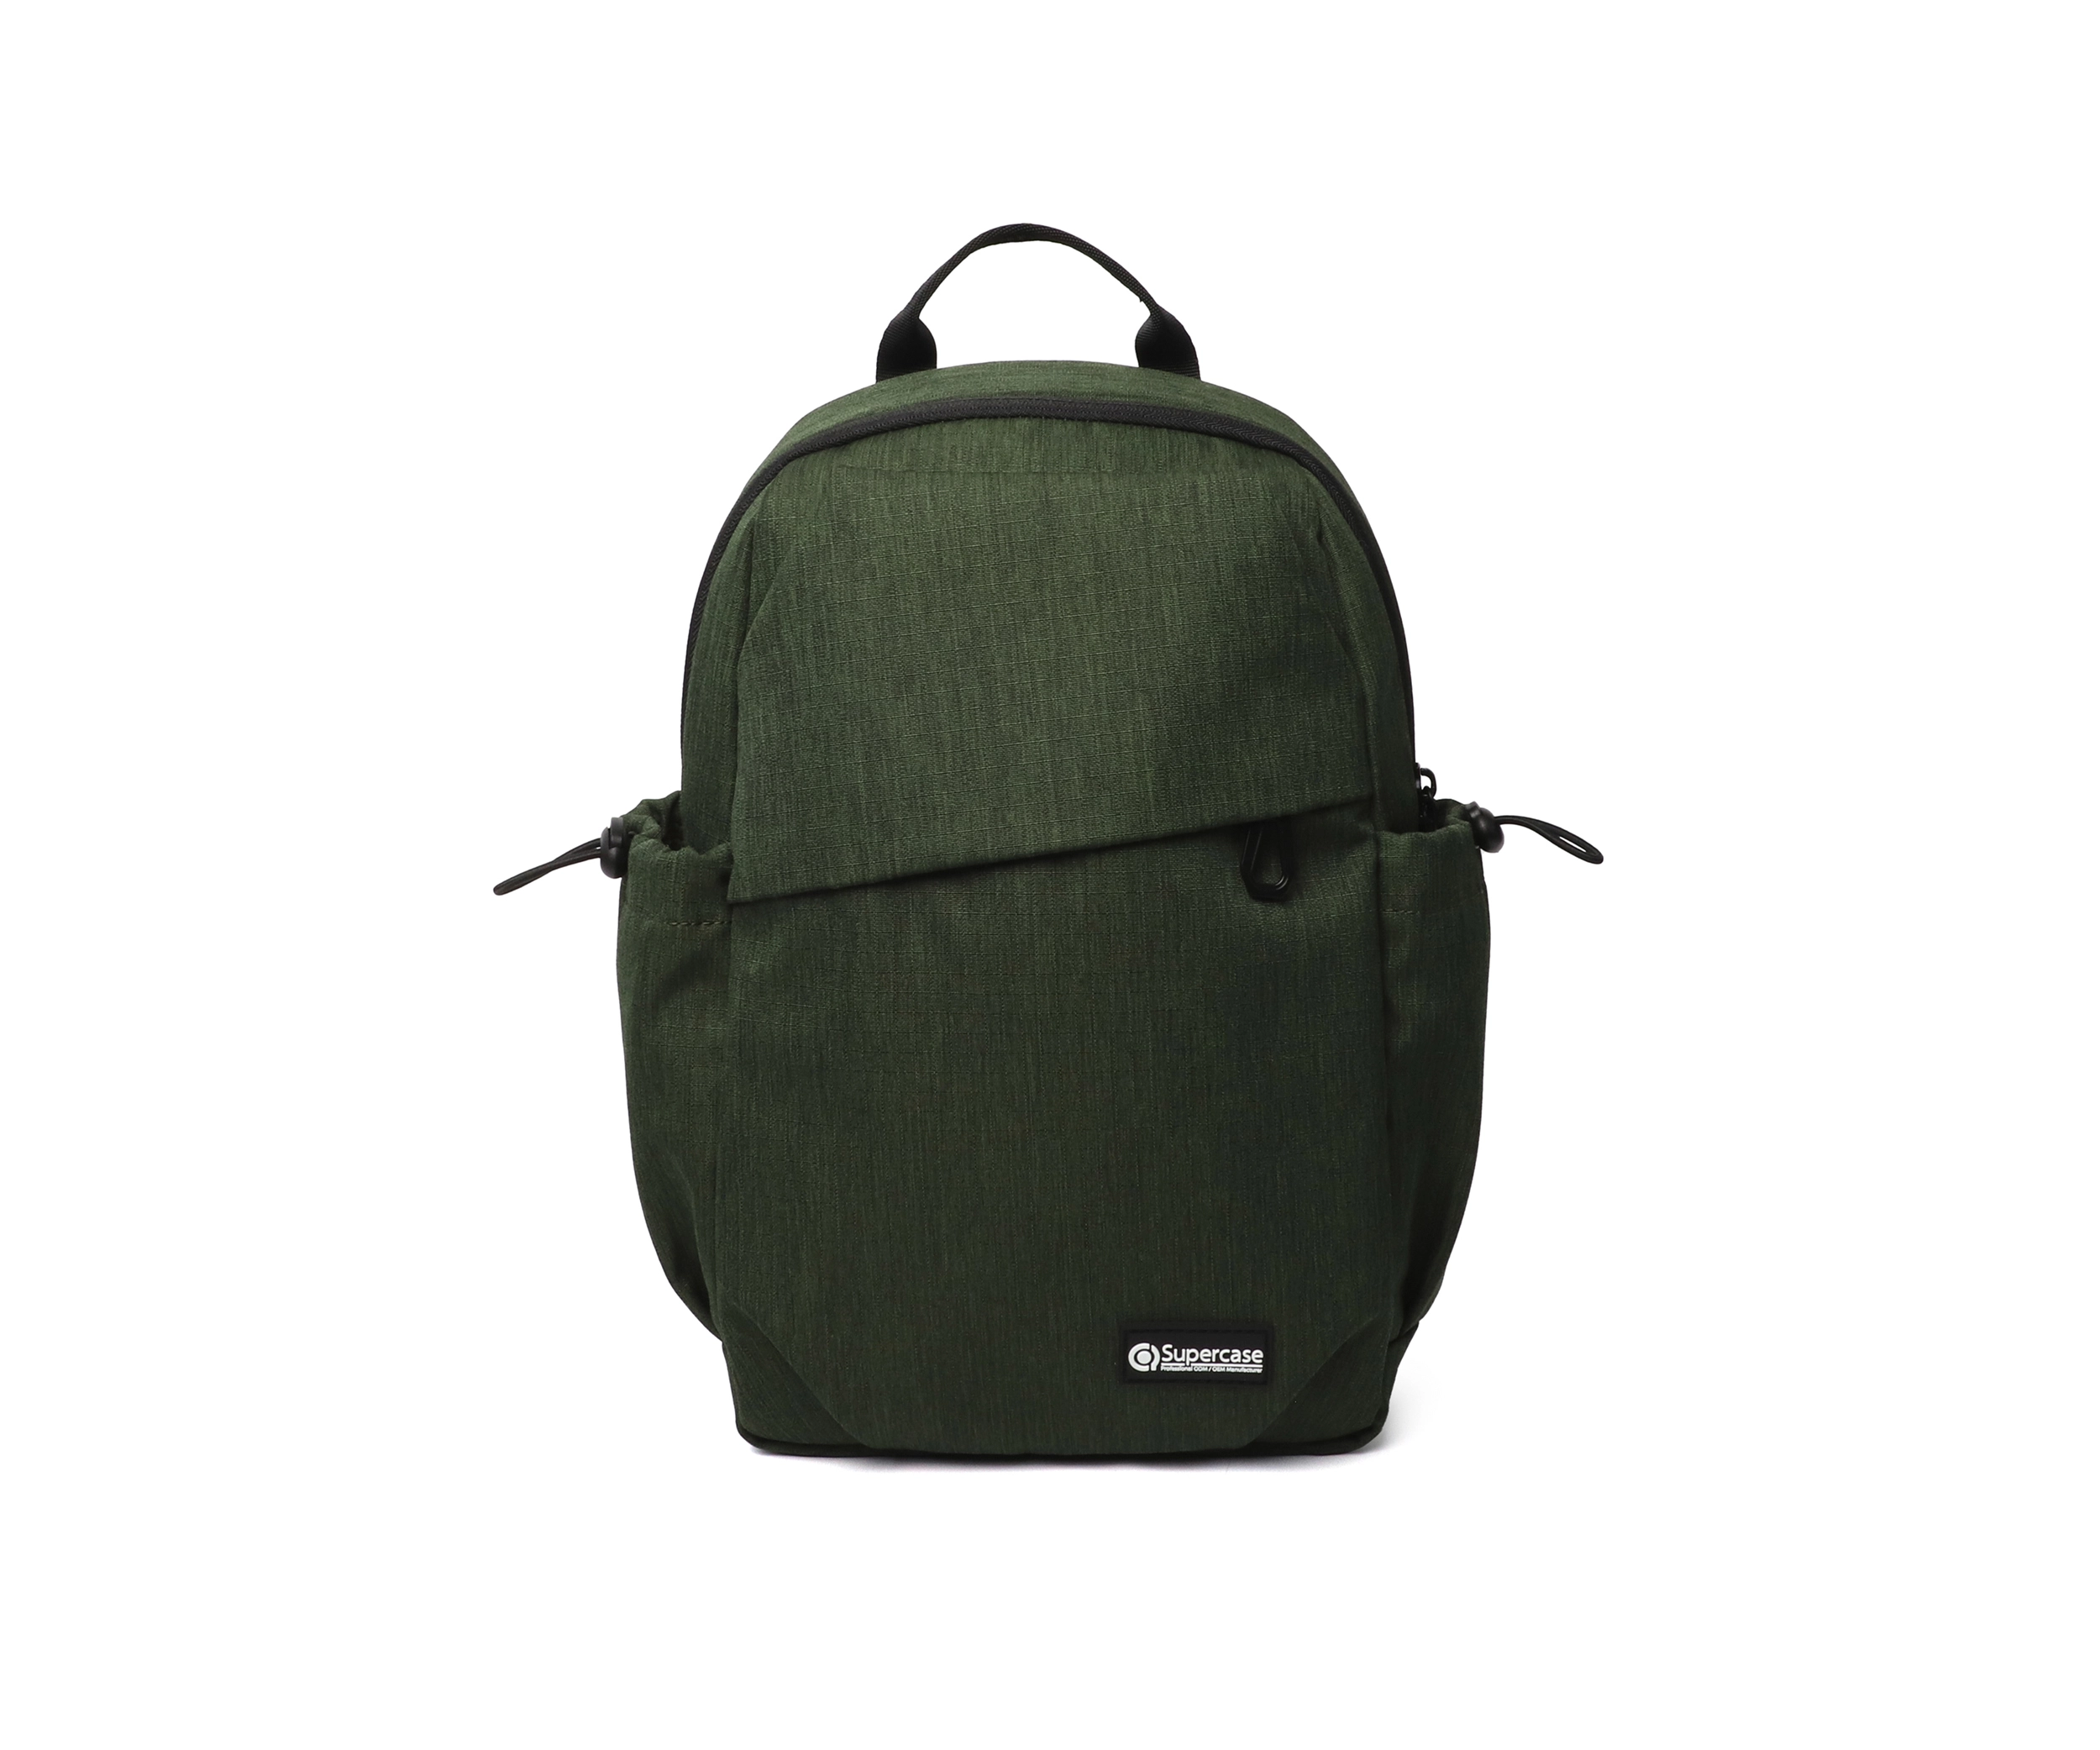 Customizing Your Backpack for Your Customers's Needs